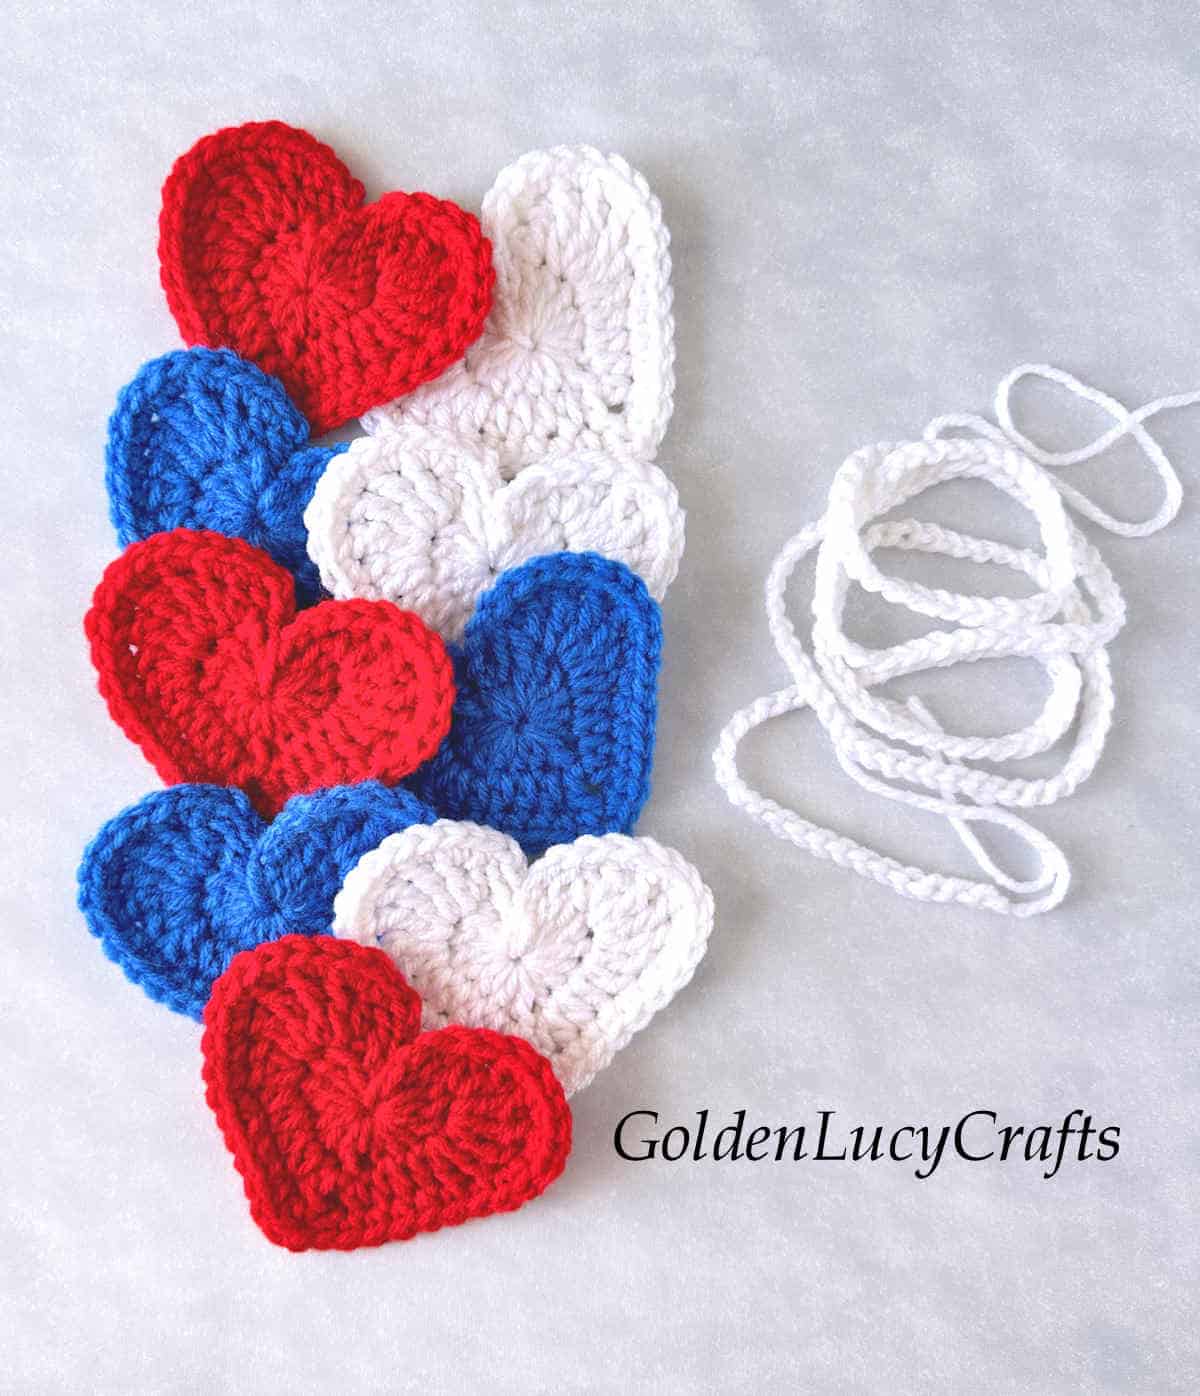 Red, white and blue crocheted hearts and crocheted string.